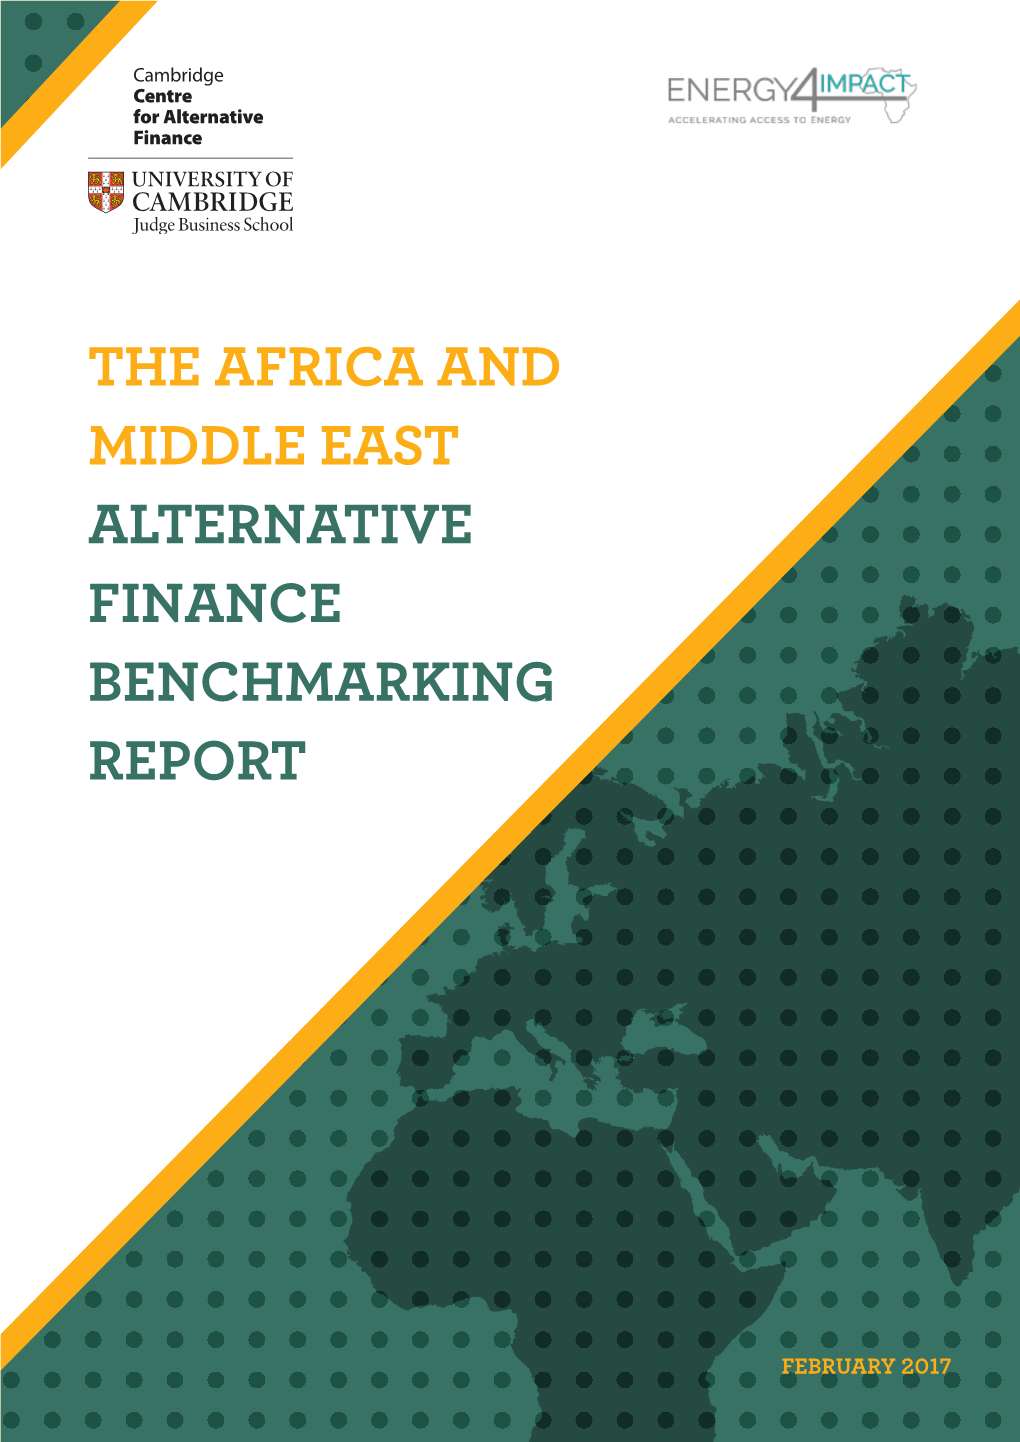 The Africa and Middle East Alternative Finance Benchmarking Report